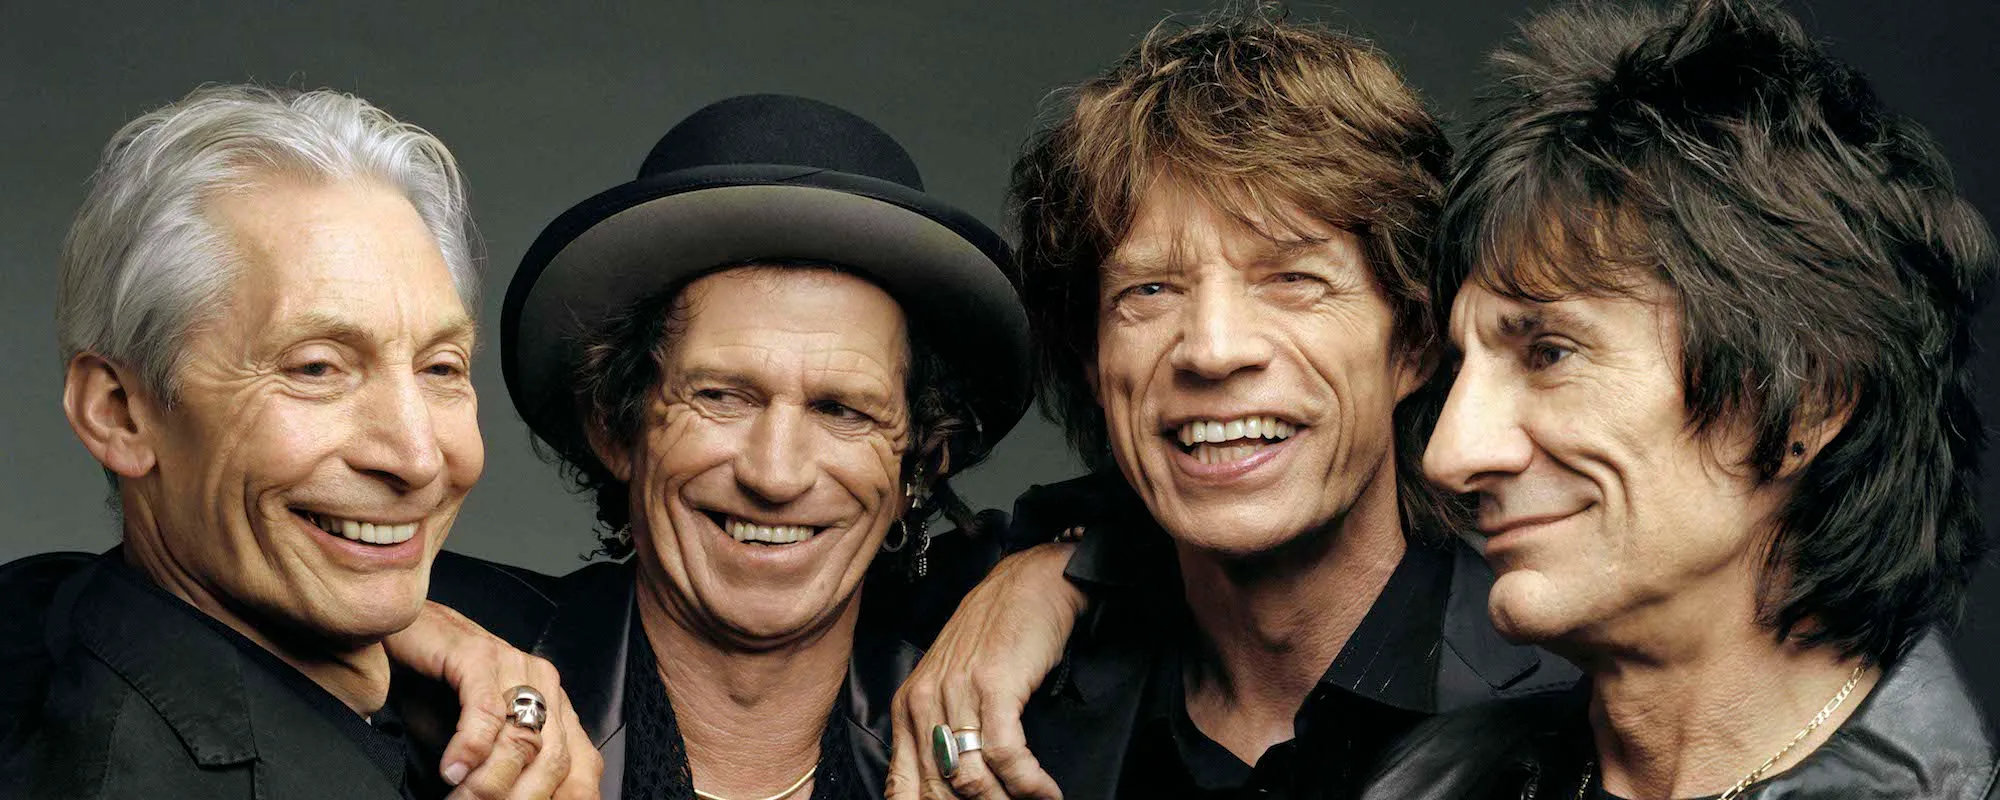 10 Things We Learned from Episode 2 of the New Rolling Stones Doc ‘My Life as a Rolling Stone’